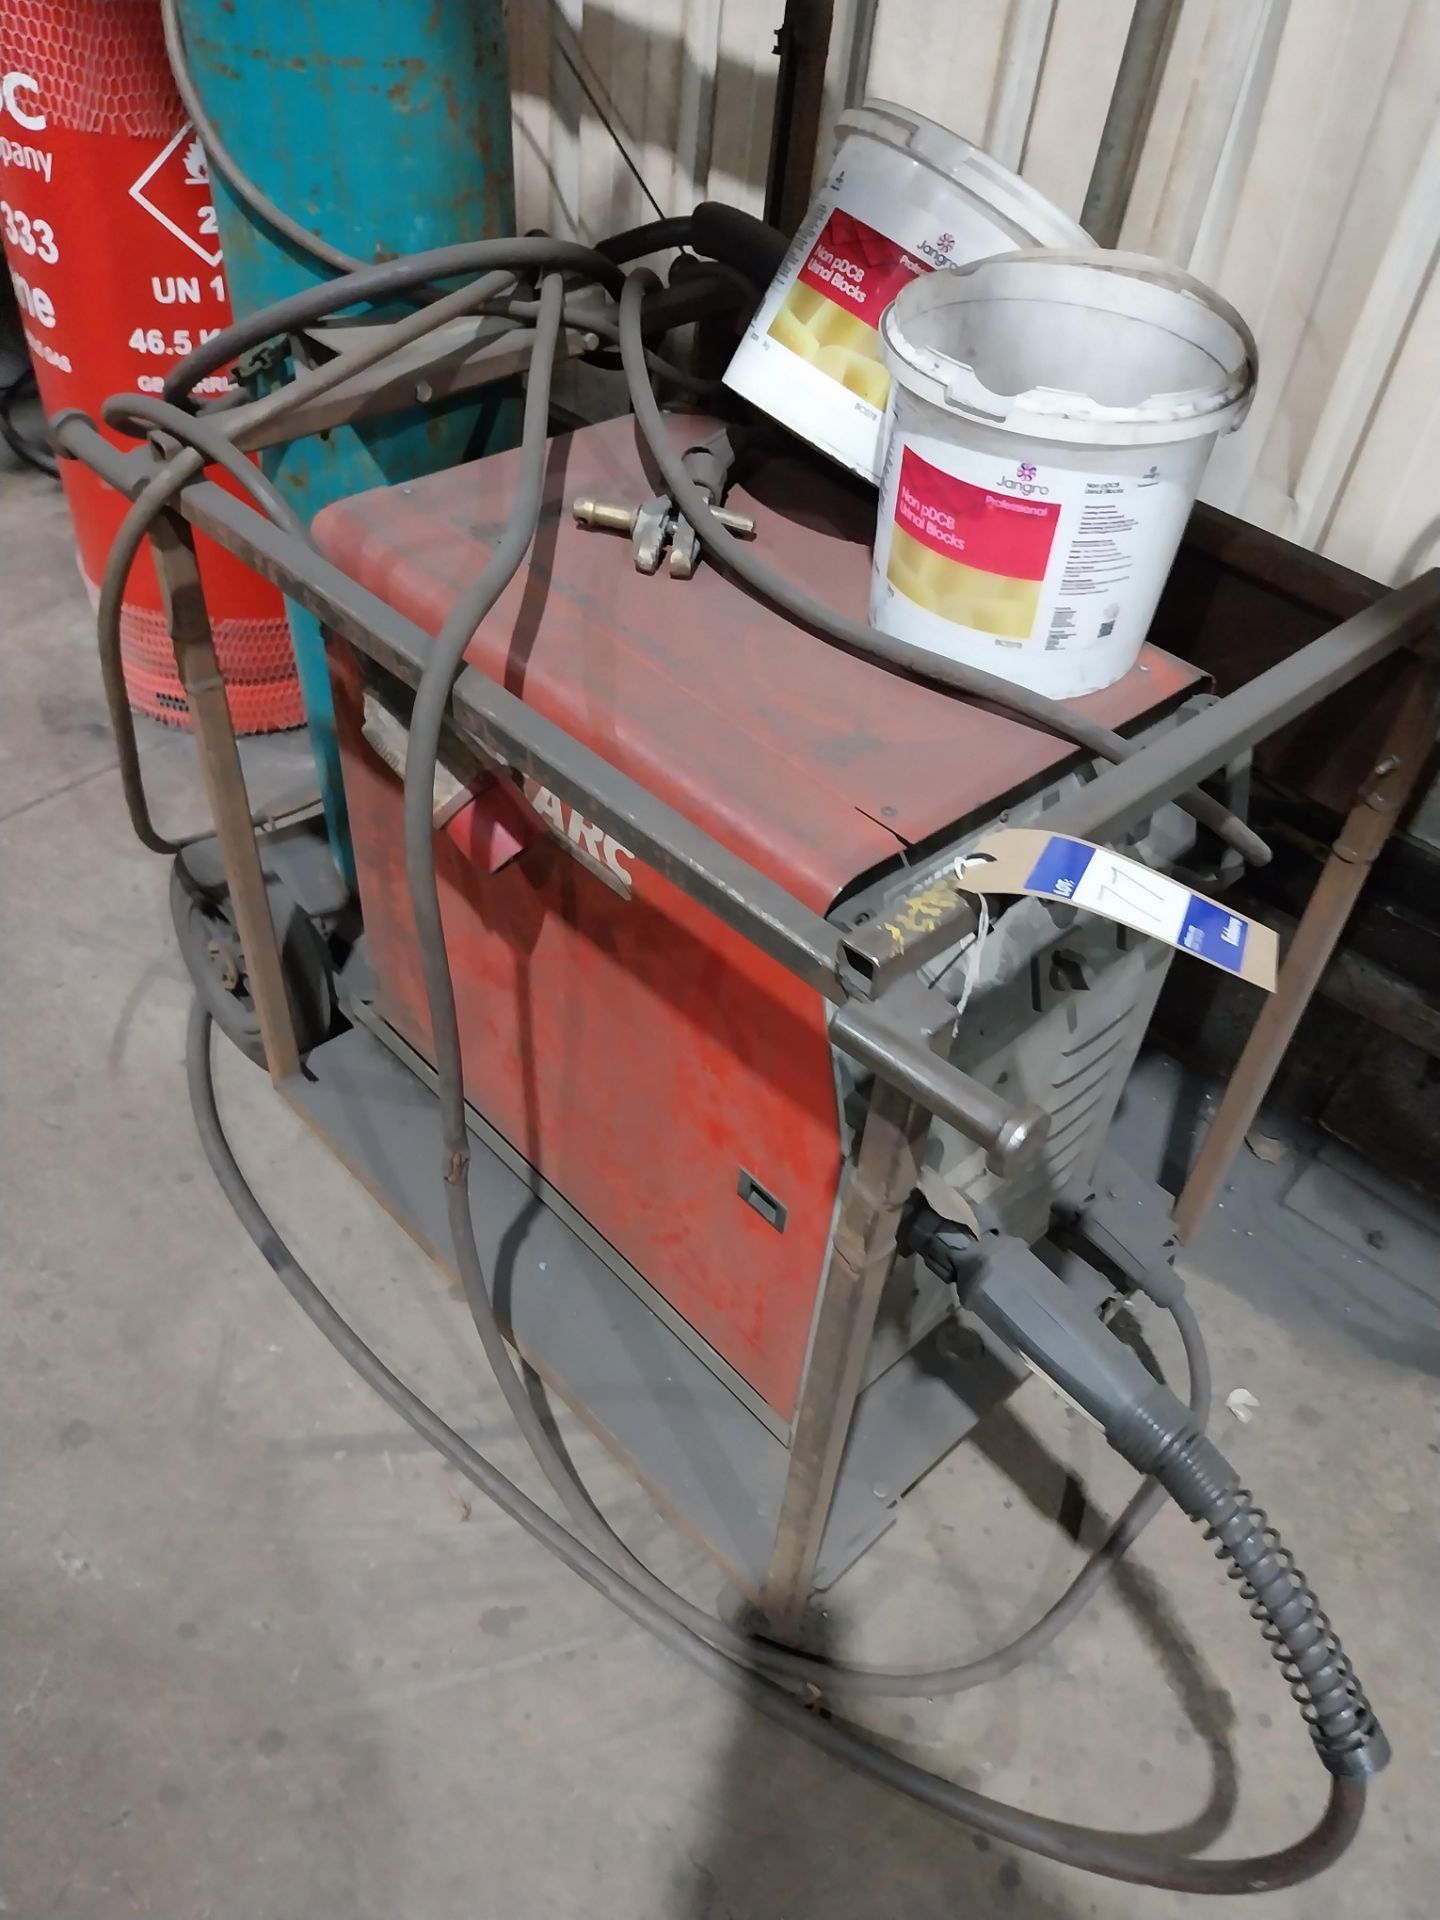 TecArc compact mig 423 mig welder with torch and clamp (bottle not included) - Image 4 of 4